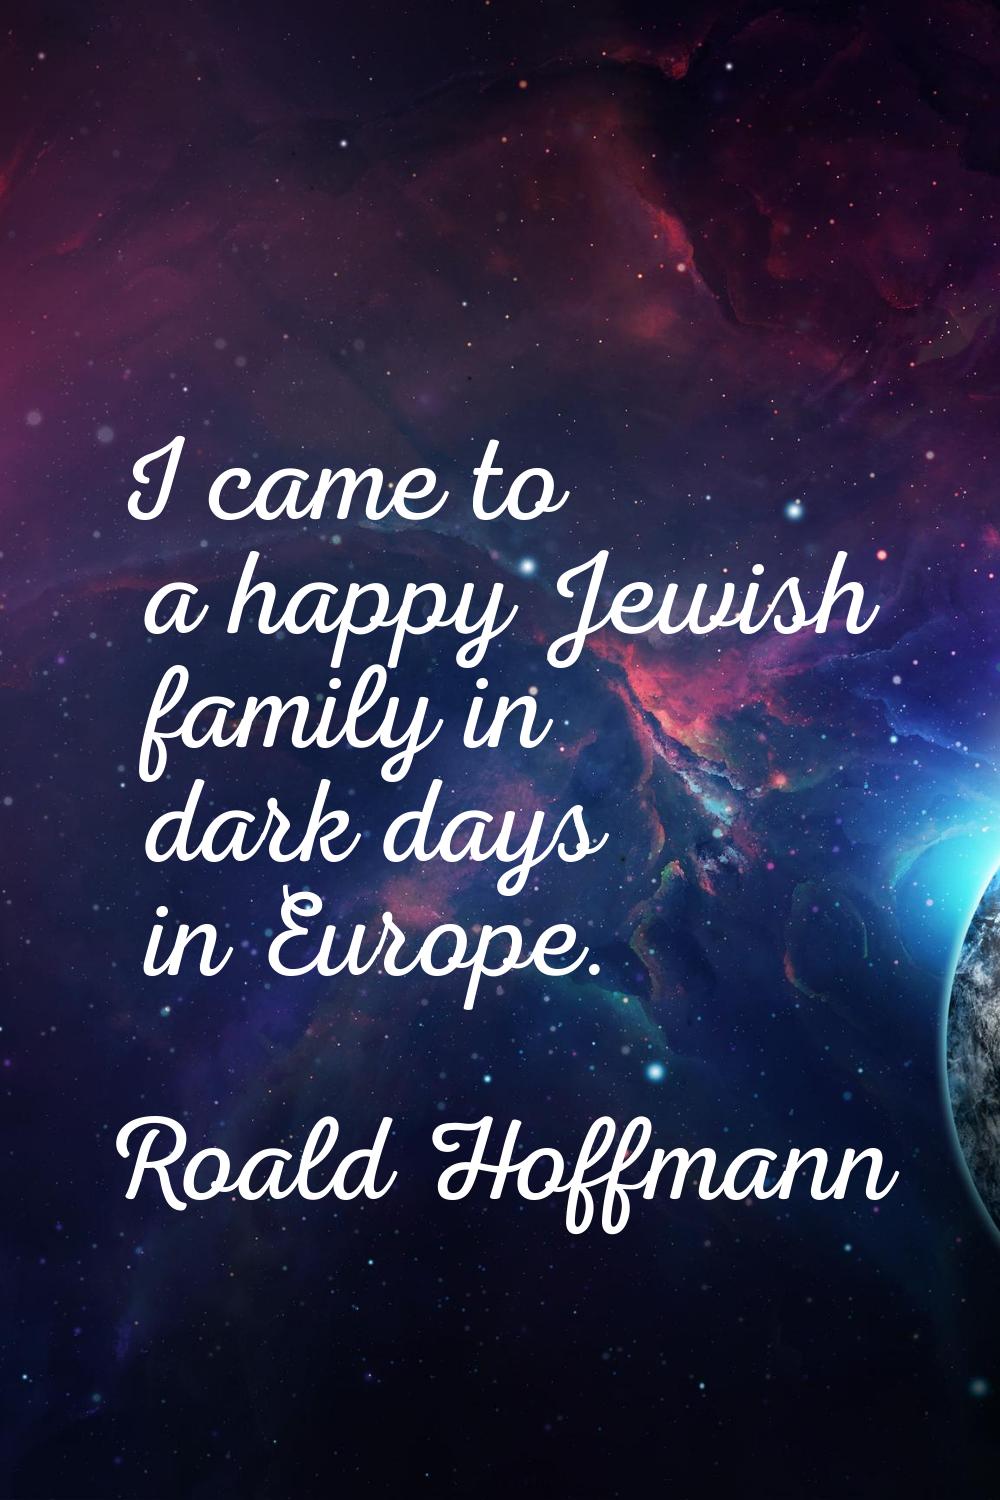 I came to a happy Jewish family in dark days in Europe.